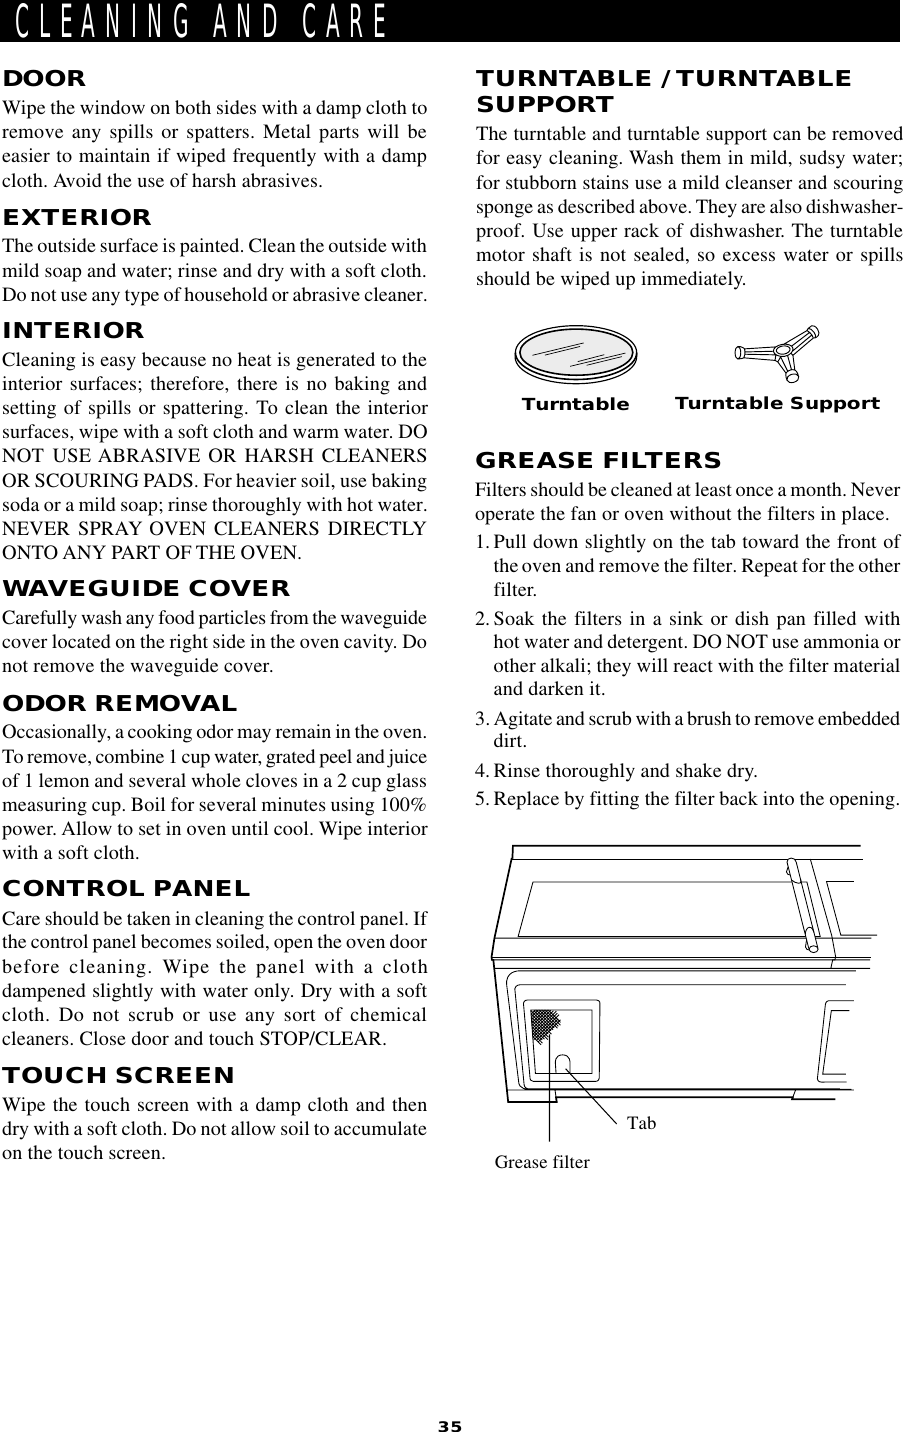 35DOORWipe the window on both sides with a damp cloth toremove any spills or spatters. Metal parts will beeasier to maintain if wiped frequently with a dampcloth. Avoid the use of harsh abrasives.EXTERIORThe outside surface is painted. Clean the outside withmild soap and water; rinse and dry with a soft cloth.Do not use any type of household or abrasive cleaner.INTERIORCleaning is easy because no heat is generated to theinterior surfaces; therefore, there is no baking andsetting of spills or spattering. To clean the interiorsurfaces, wipe with a soft cloth and warm water. DONOT USE ABRASIVE OR HARSH CLEANERSOR SCOURING PADS. For heavier soil, use bakingsoda or a mild soap; rinse thoroughly with hot water.NEVER SPRAY OVEN CLEANERS DIRECTLYONTO ANY PART OF THE OVEN.WAVEGUIDE COVERCarefully wash any food particles from the waveguidecover located on the right side in the oven cavity. Donot remove the waveguide cover.ODOR REMOVALOccasionally, a cooking odor may remain in the oven.To remove, combine 1 cup water, grated peel and juiceof 1 lemon and several whole cloves in a 2 cup glassmeasuring cup. Boil for several minutes using 100%power. Allow to set in oven until cool. Wipe interiorwith a soft cloth.CONTROL PANELCare should be taken in cleaning the control panel. Ifthe control panel becomes soiled, open the oven doorbefore cleaning. Wipe the panel with a clothdampened slightly with water only. Dry with a softcloth. Do not scrub or use any sort of chemicalcleaners. Close door and touch STOP/CLEAR.TOUCH SCREENWipe the touch screen with a damp cloth and thendry with a soft cloth. Do not allow soil to accumulateon the touch screen.CLEANING AND CARETURNTABLE / TURNTABLESUPPORTThe turntable and turntable support can be removedfor easy cleaning. Wash them in mild, sudsy water;for stubborn stains use a mild cleanser and scouringsponge as described above. They are also dishwasher-proof. Use upper rack of dishwasher. The turntablemotor shaft is not sealed, so excess water or spillsshould be wiped up immediately.Turntable Turntable SupportGREASE FILTERSFilters should be cleaned at least once a month. Neveroperate the fan or oven without the filters in place.1. Pull down slightly on the tab toward the front ofthe oven and remove the filter. Repeat for the otherfilter.2. Soak the filters in a sink or dish pan filled withhot water and detergent. DO NOT use ammonia orother alkali; they will react with the filter materialand darken it.3. Agitate and scrub with a brush to remove embeddeddirt.4. Rinse thoroughly and shake dry.5. Replace by fitting the filter back into the opening.Grease filterTab